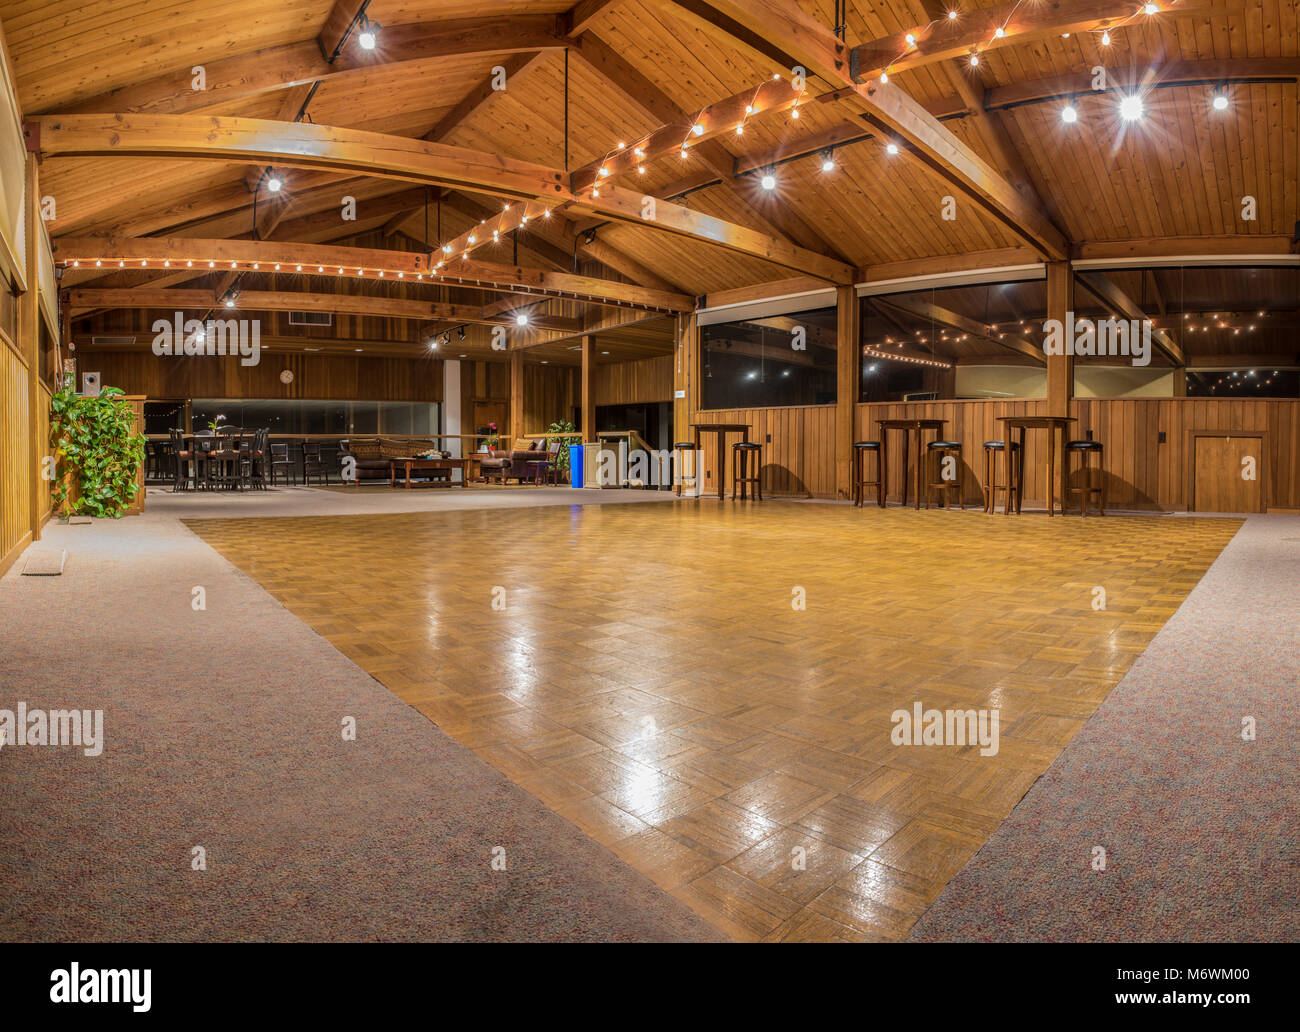 Exquisite wood floor and vaulted ceiling interior of dance hall party room with sparkling lights.  Pierpont Racquet Club of Ventura, California 2018. Stock Photo